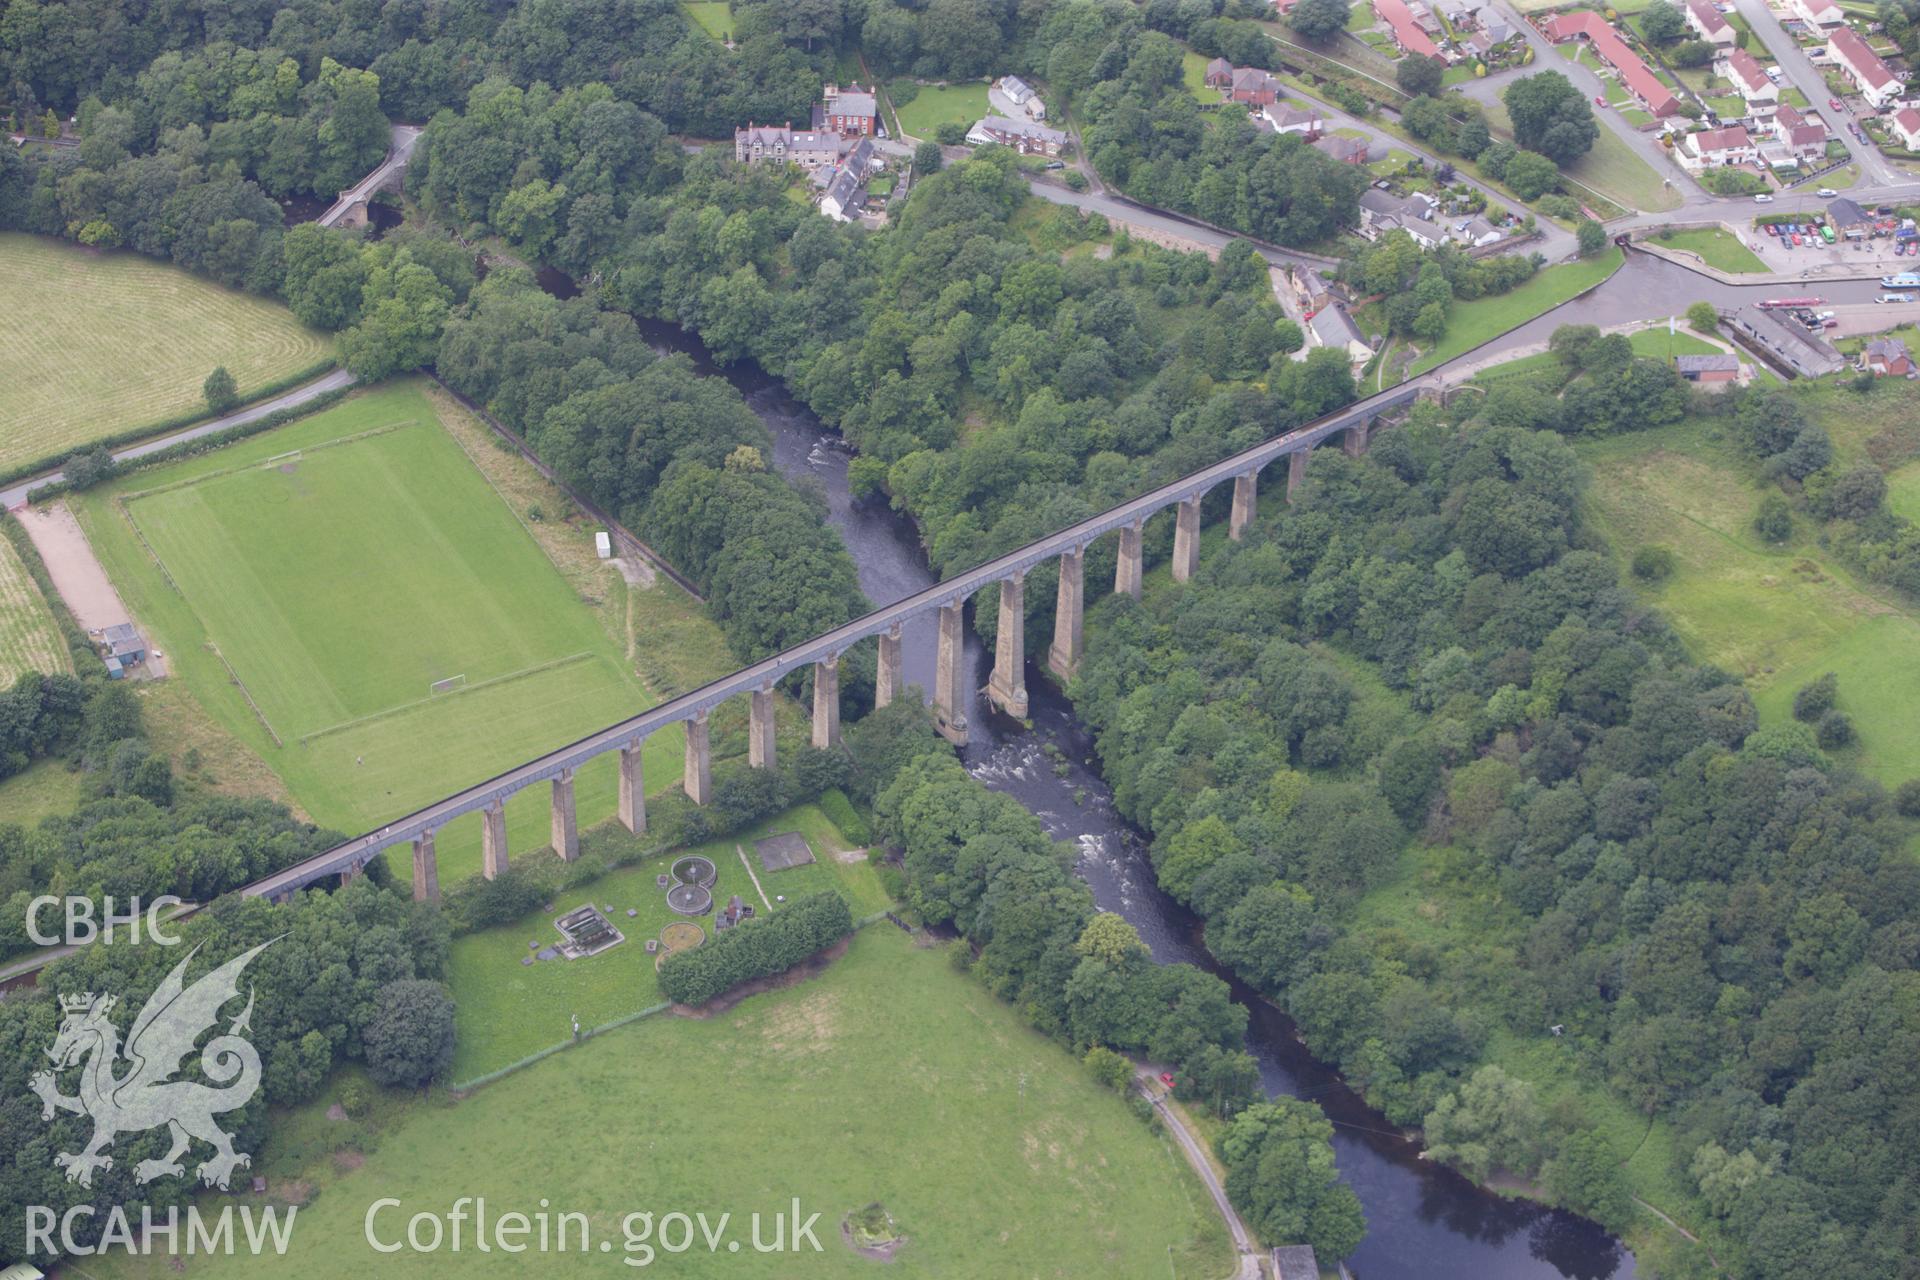 RCAHMW colour oblique aerial photograph of Pontcysyllte Aqueduct on the Ellesmere Canal. Taken on 08 July 2009 by Toby Driver